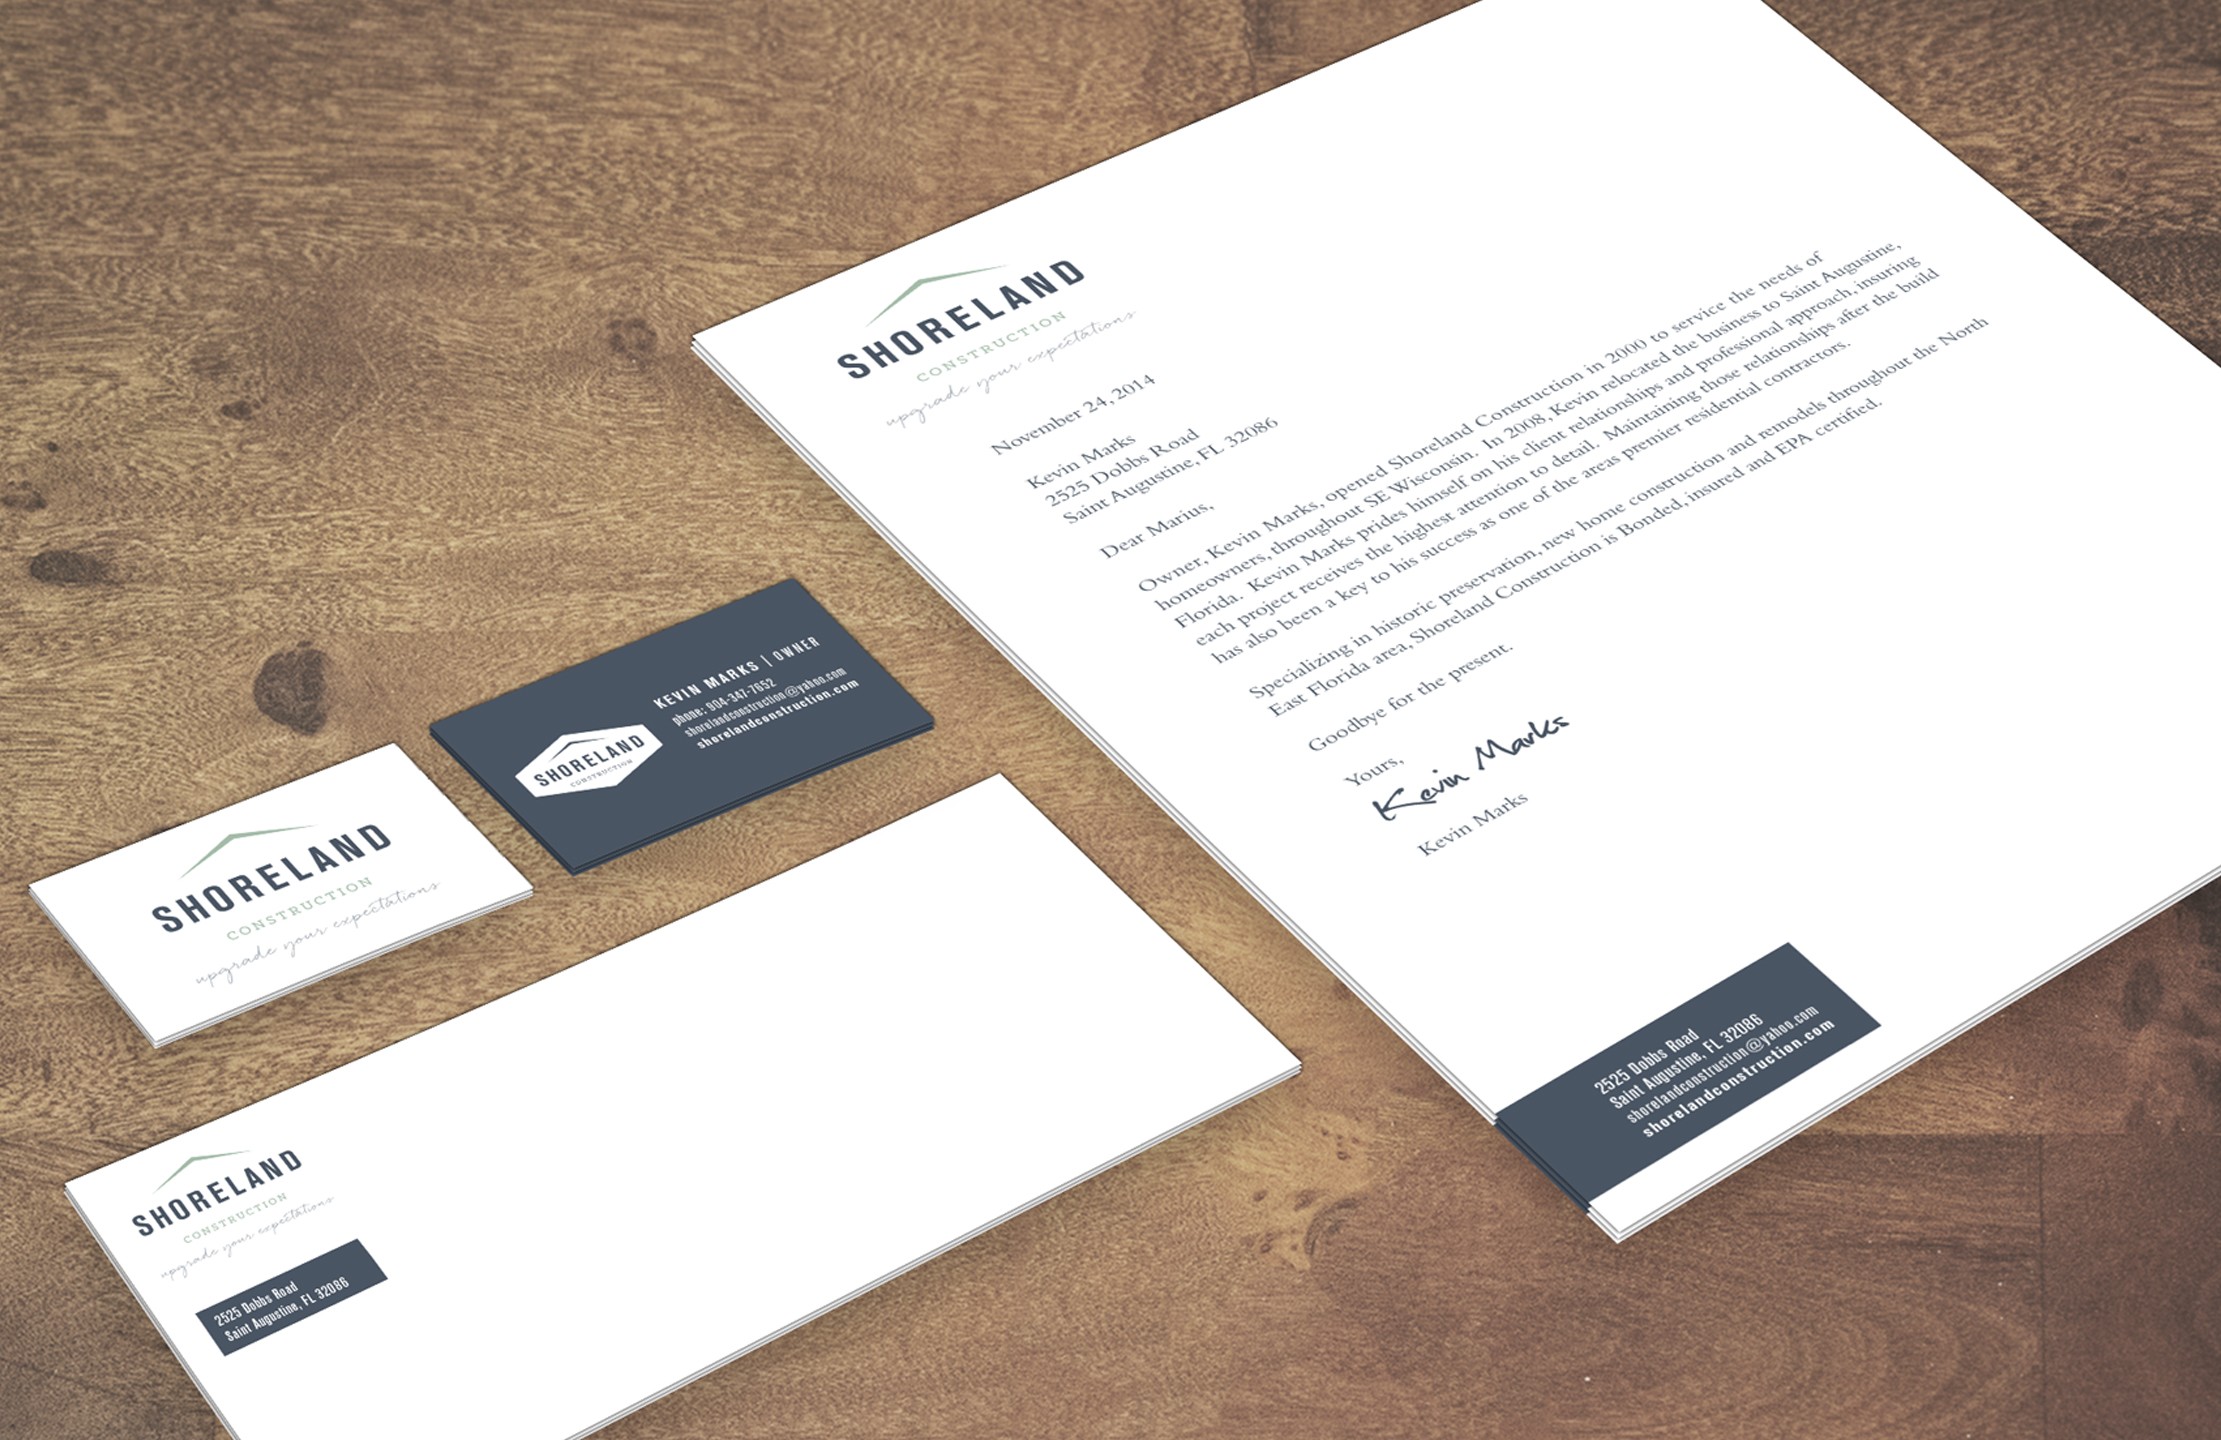 Shoreland Construction Branding Stationery by Just Make Things